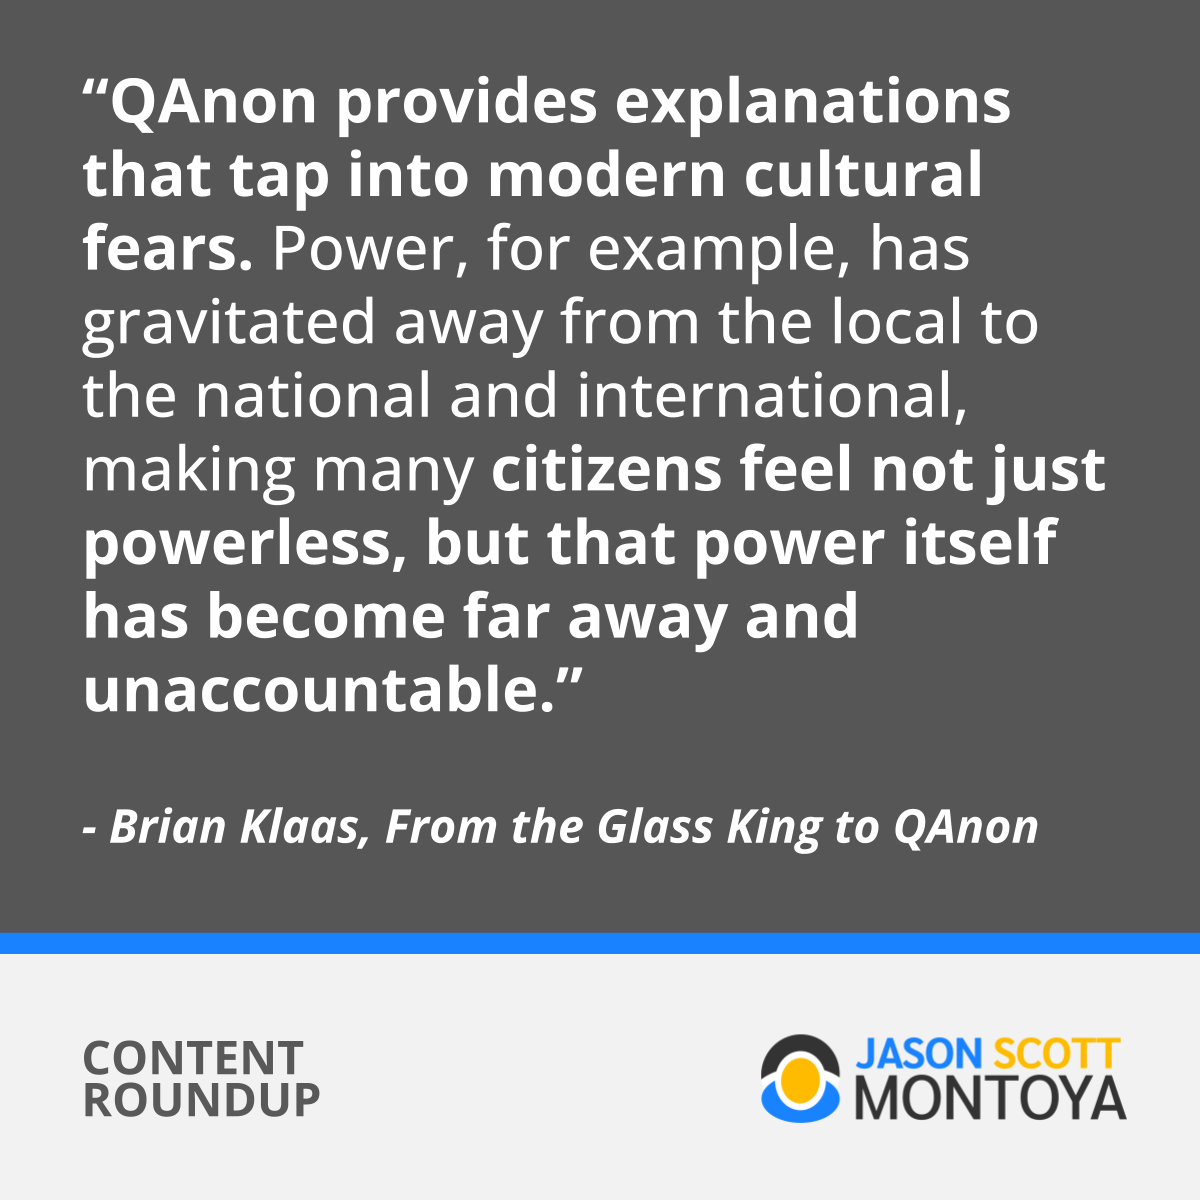 “QAnon provides explanations that tap into modern cultural fears. Power, for example, has gravitated away from the local to the national and international, making many citizens feel not just powerless, but that power itself has become far away and unaccountable.”  - Brian Klaas, From the Glass King to QAnon